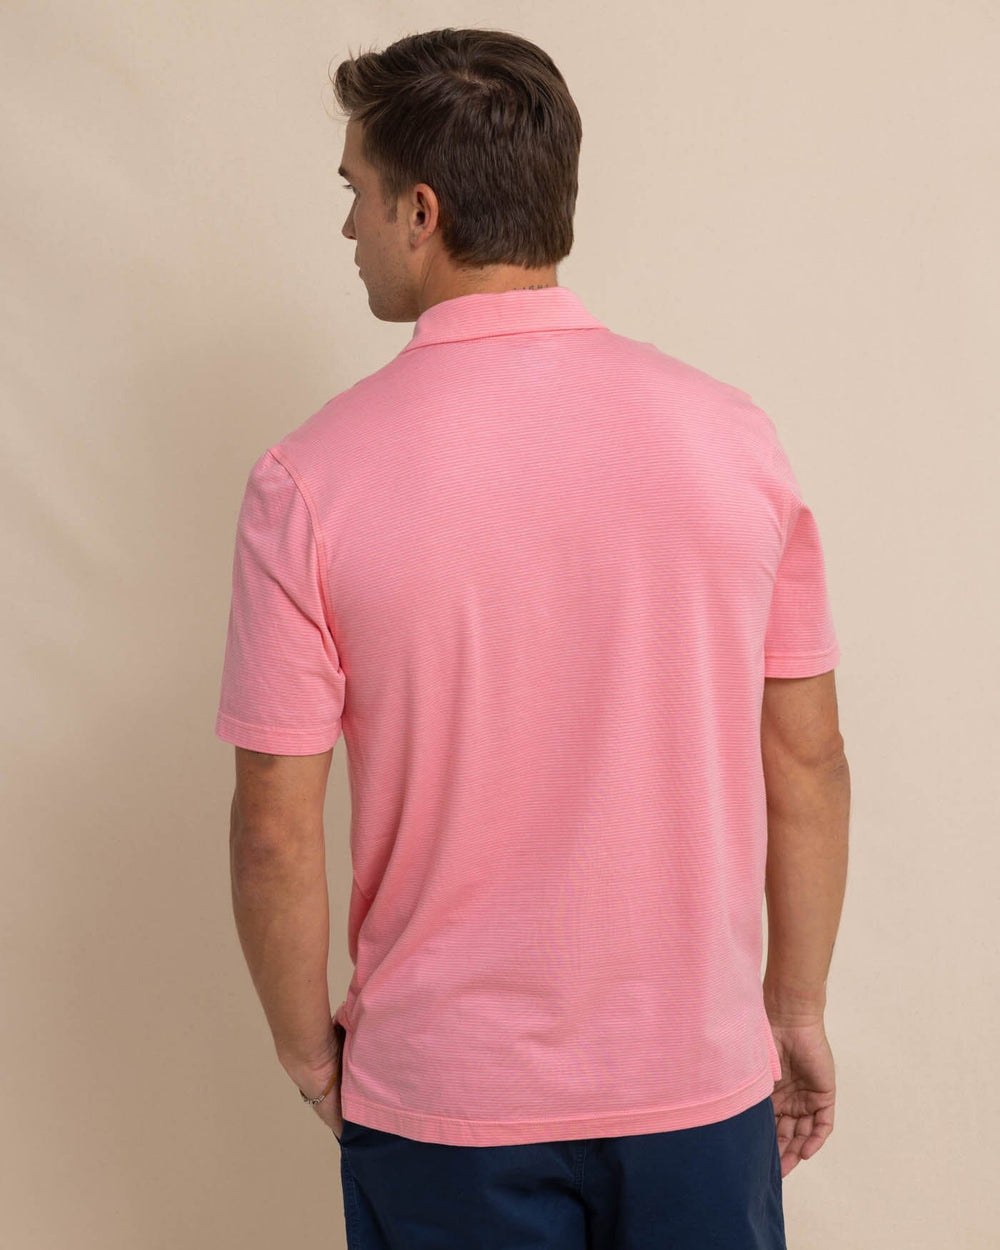 The back view of the Southern Tide The Seaport Davenport Stripe Polo by Southern Tide - Geranium Pink